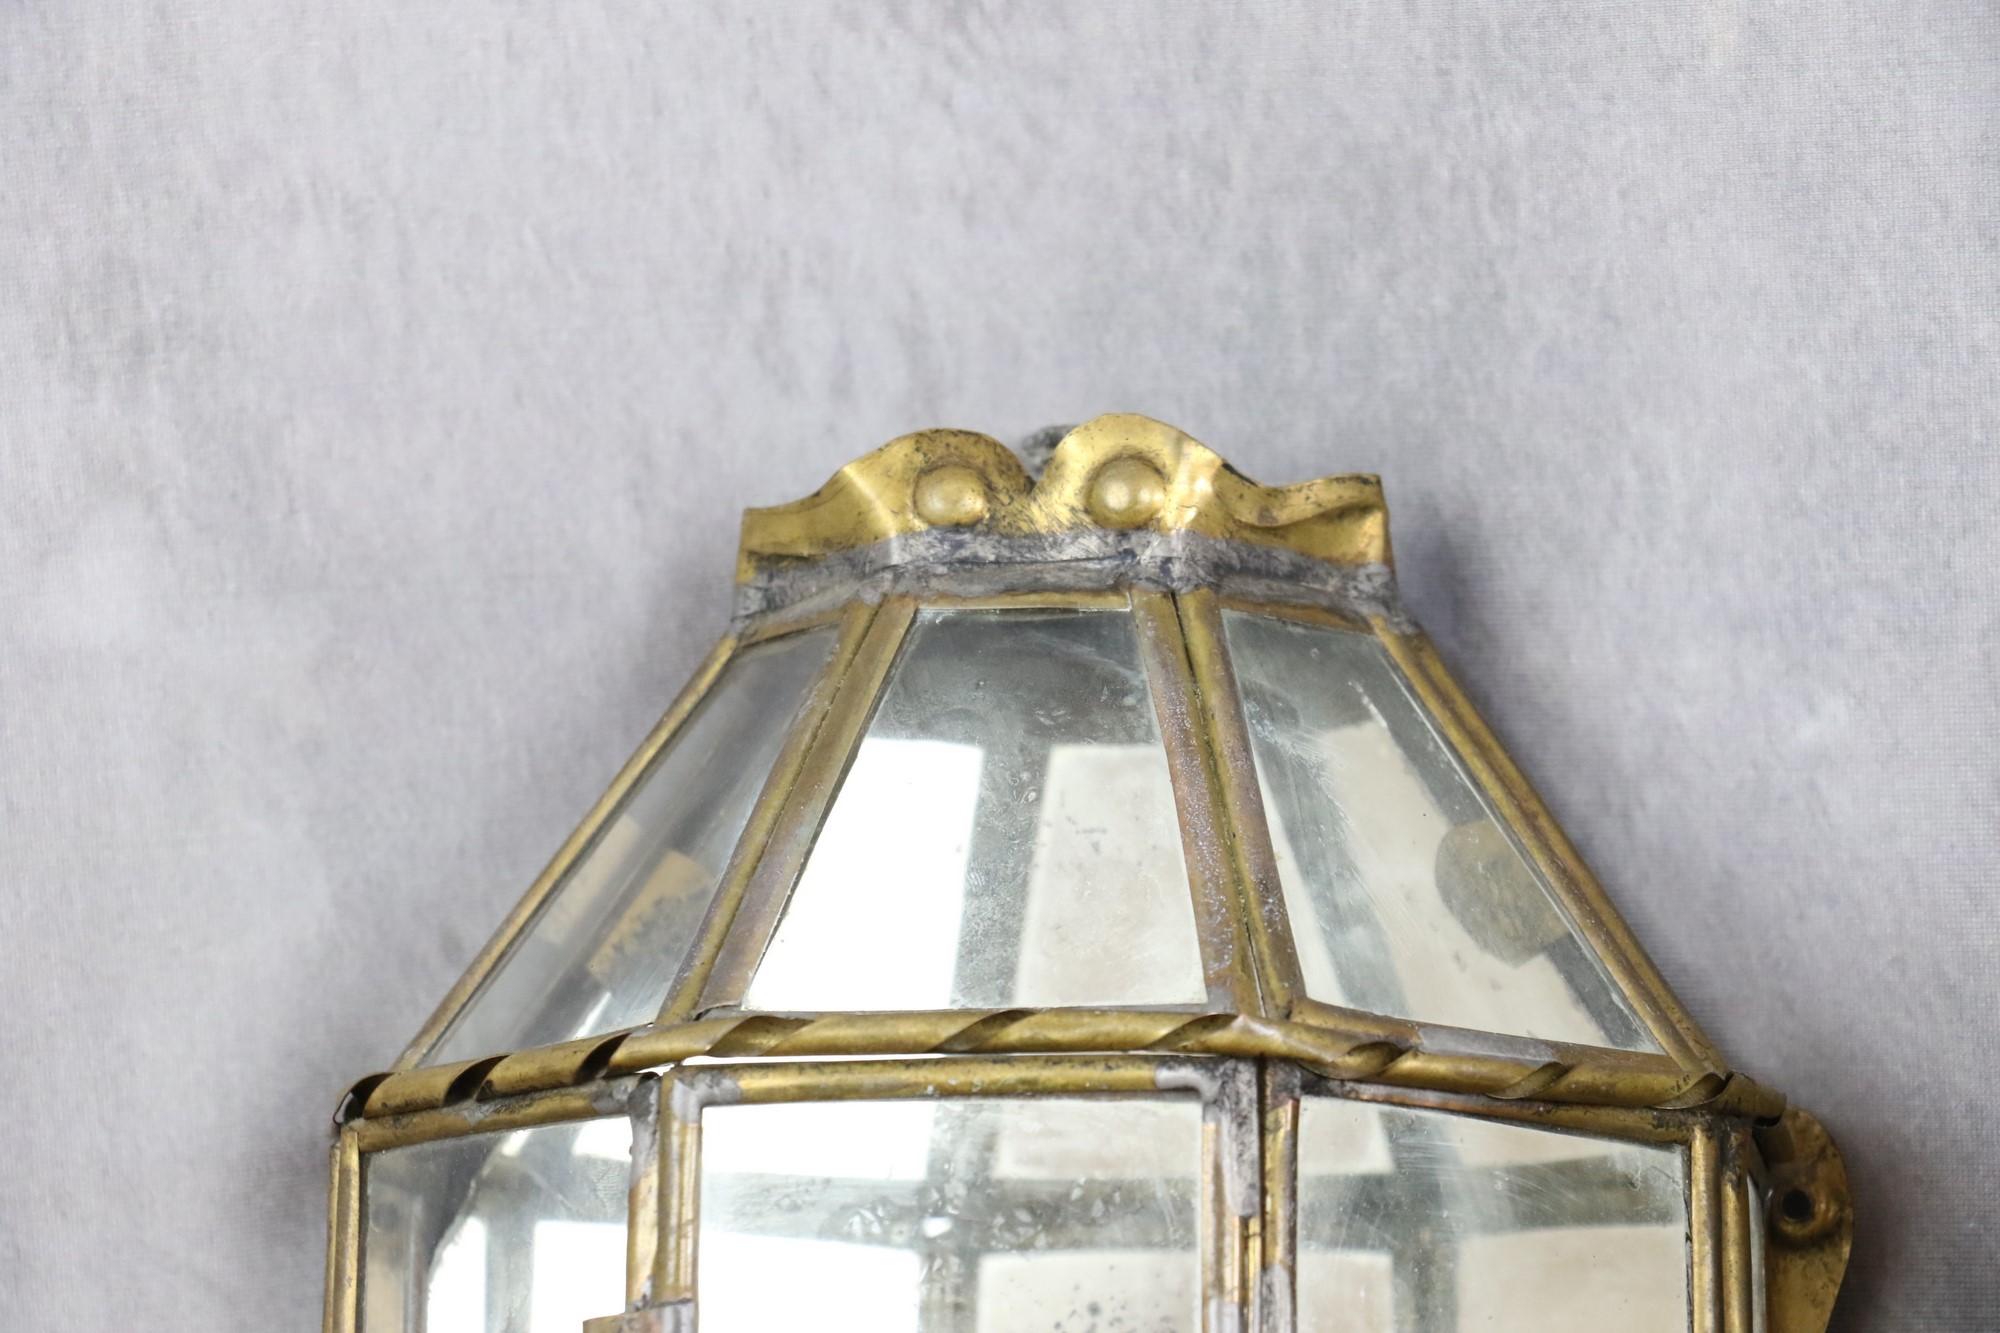 20th Century Trio of Brass and Glass Vintage Handcrafted Lantern Wall Lamps, 1940s, France For Sale